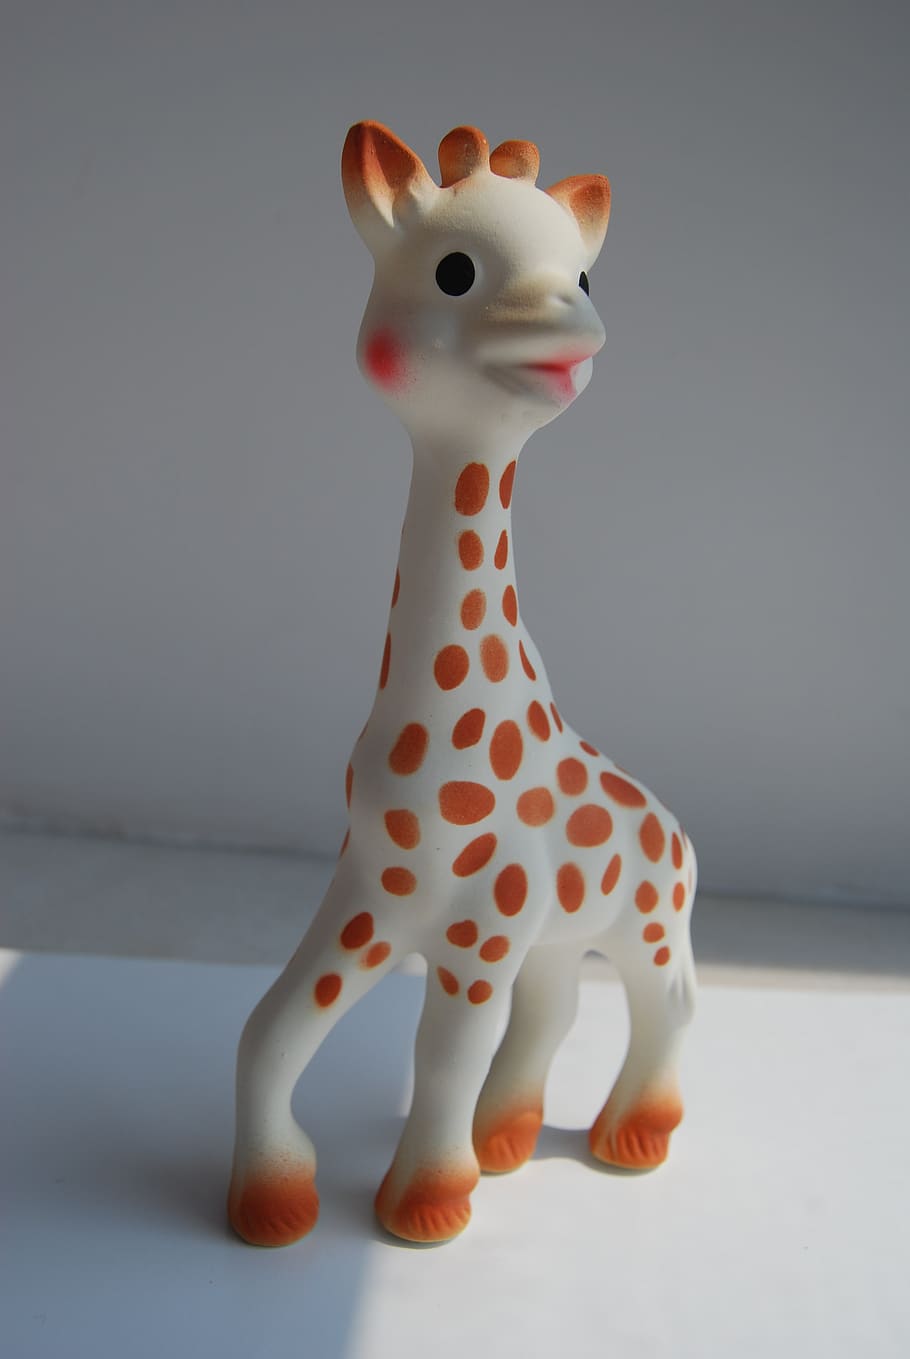 sophie, giraffe, toys, teethers, baby products, animal representation, representation, art and craft, indoors, mammal